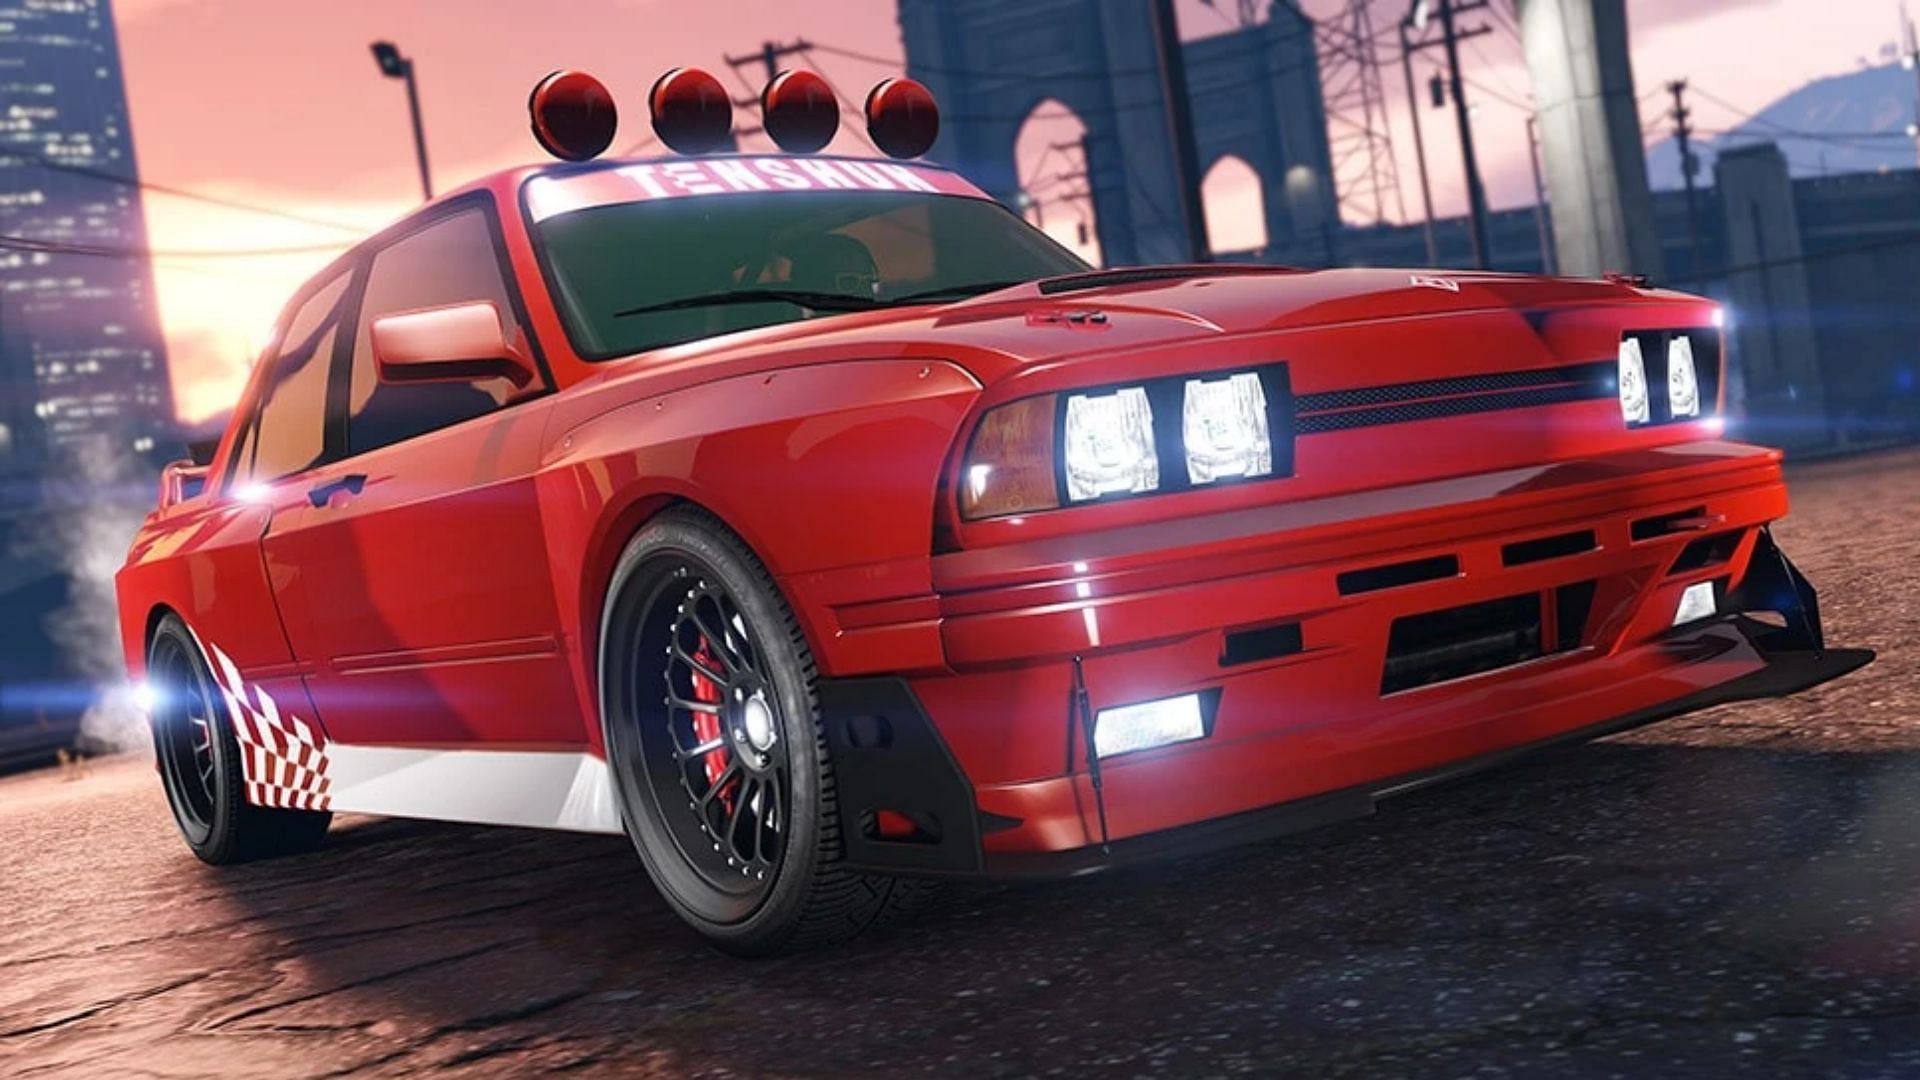 Another photo of the new car (Image via Rockstar Games)